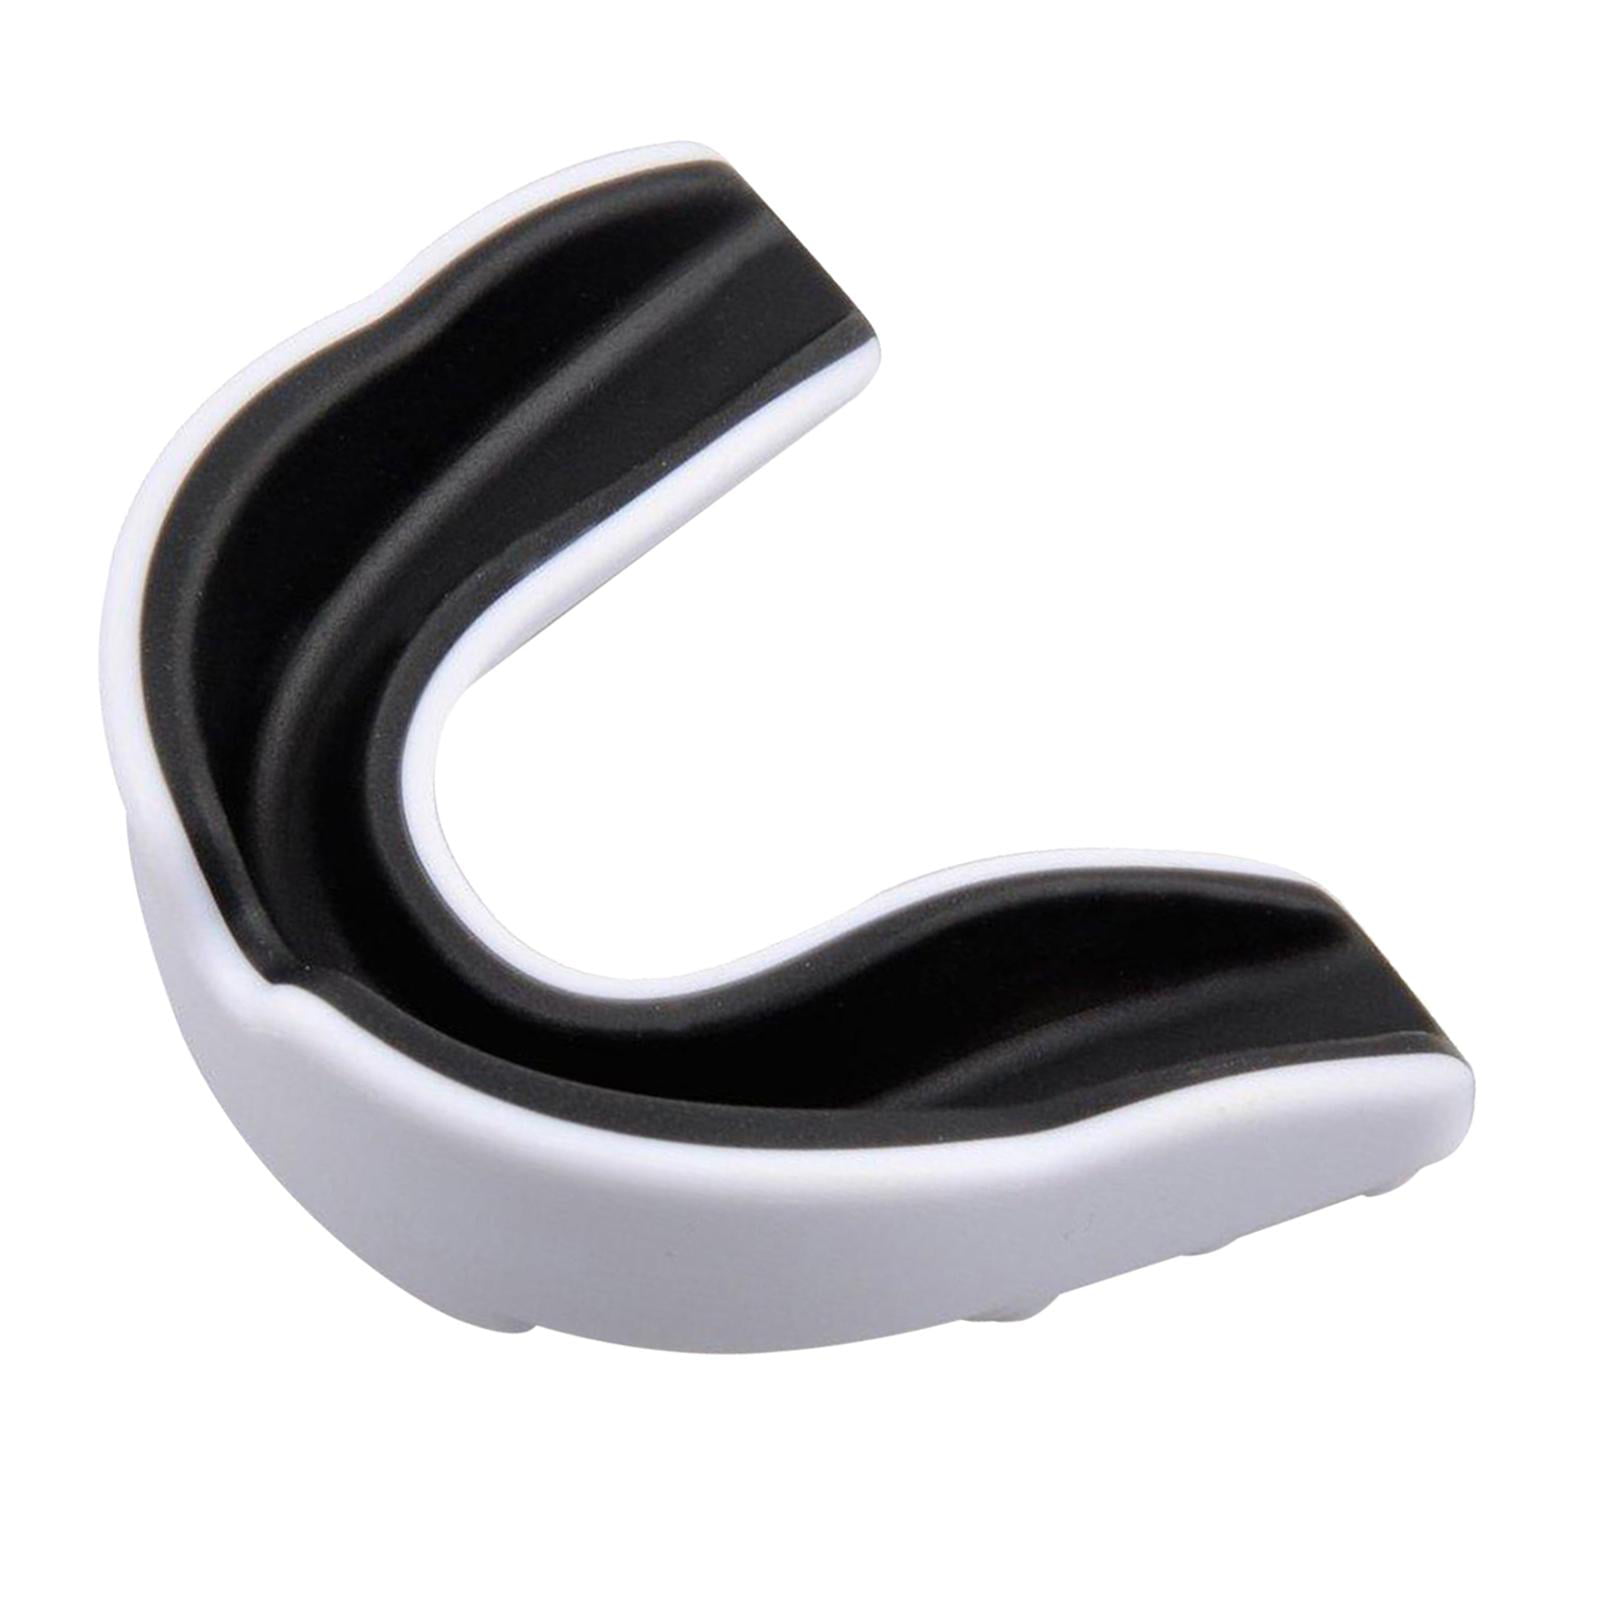 Venum Challenger Mouth Guard White Black Mouthguard Gum Shield Protection Teeth 